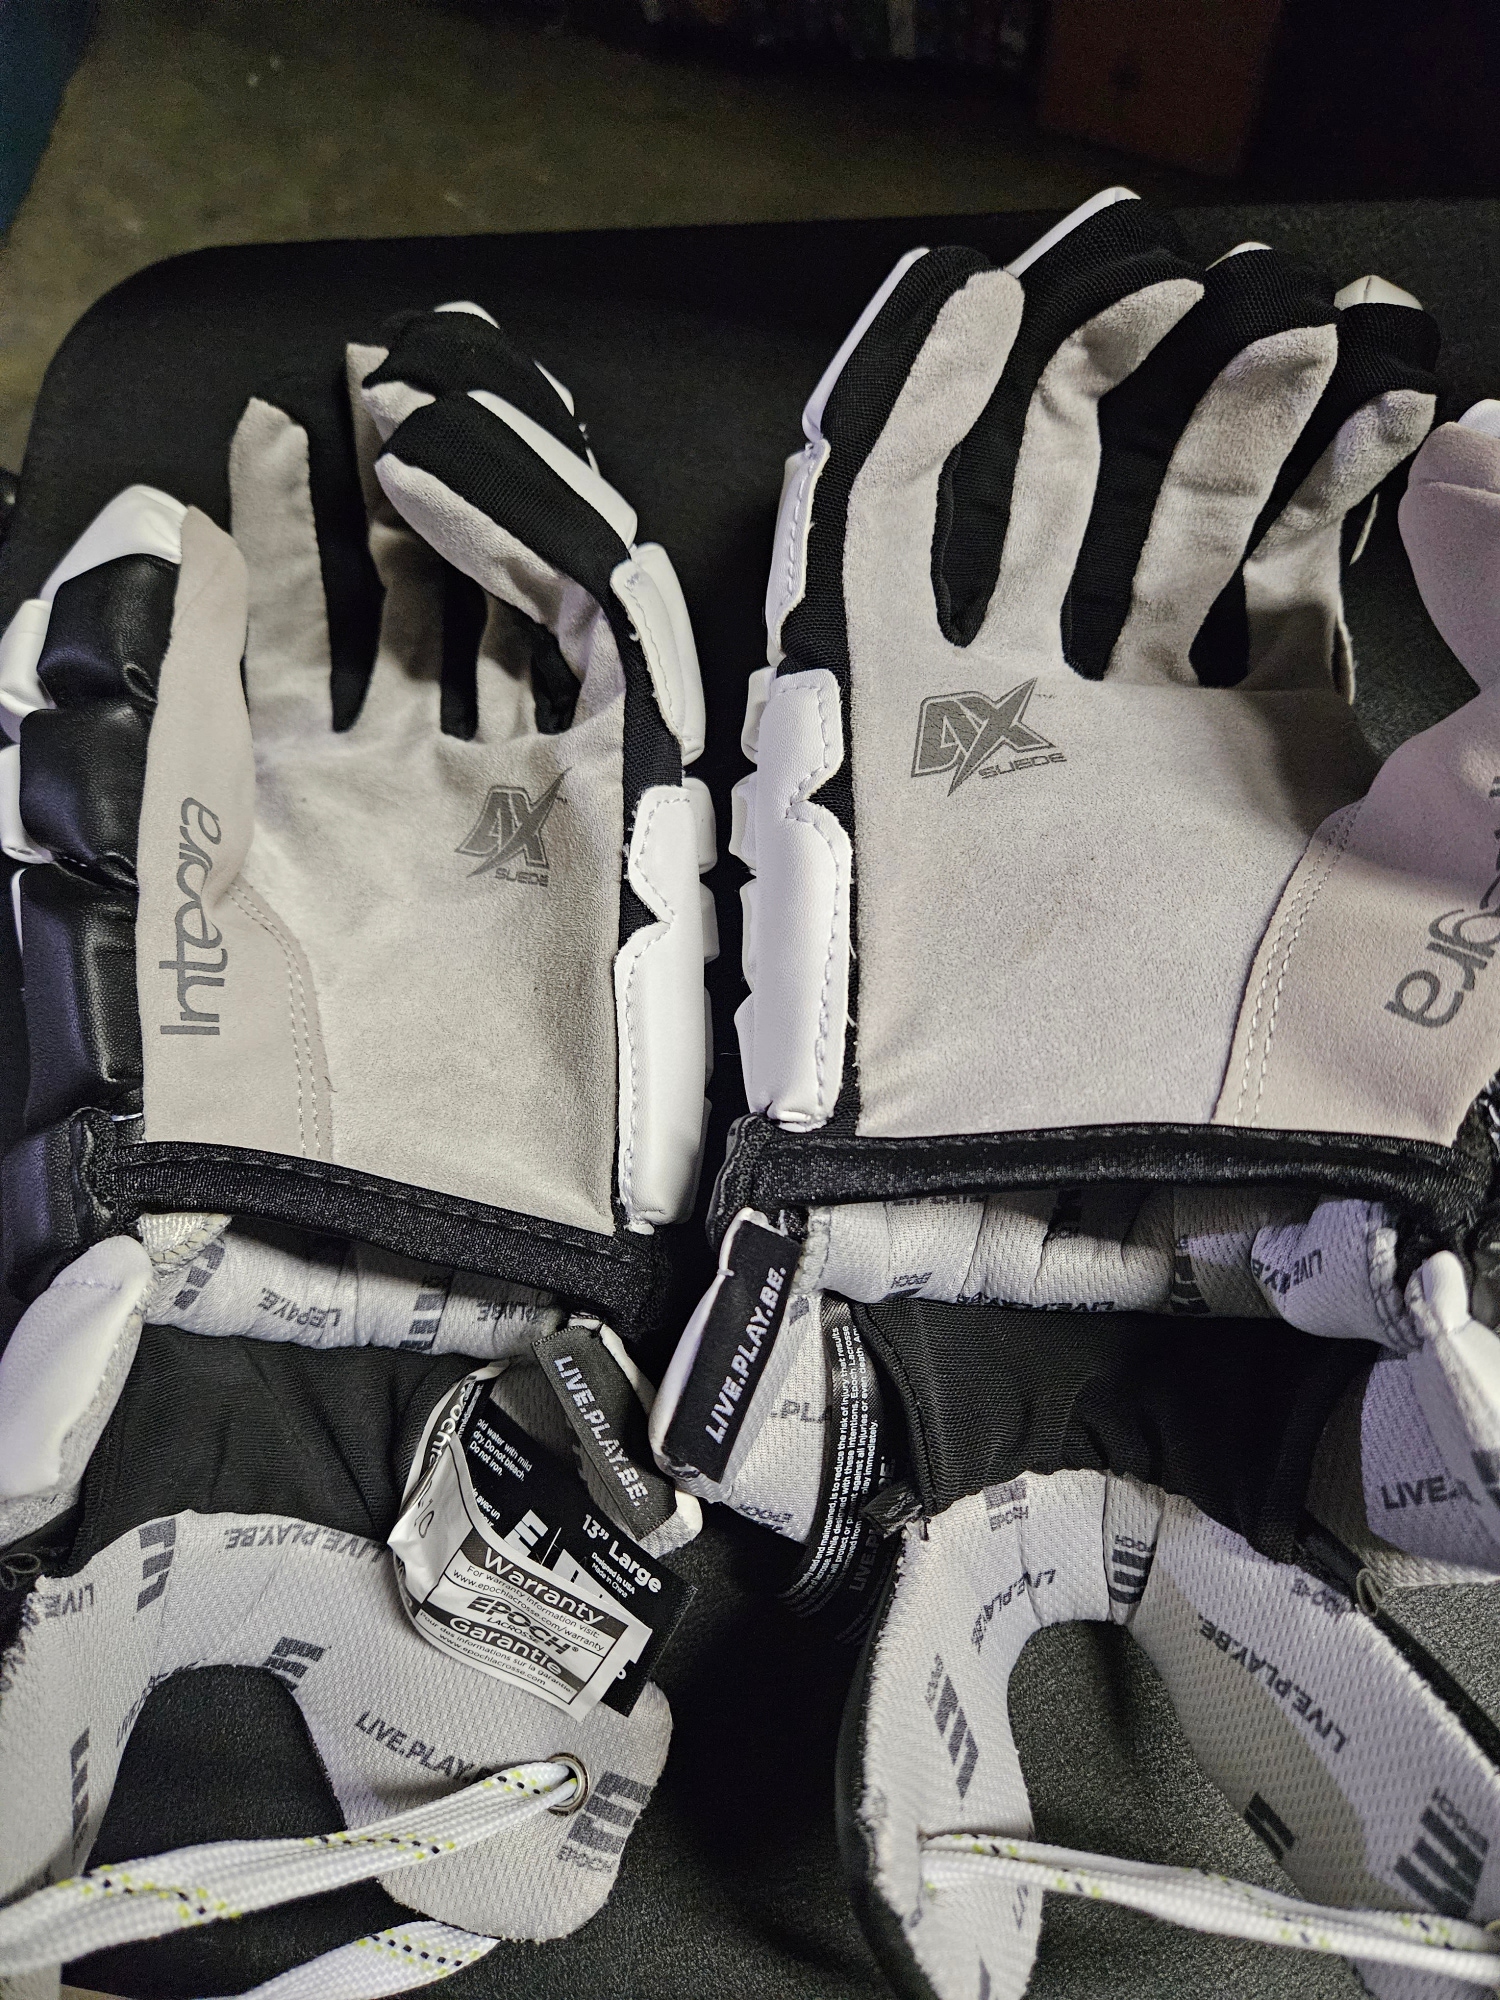 New Player's Epoch Integra Pro Lacrosse Gloves issued by Long Island Express Lacrosse Club13"